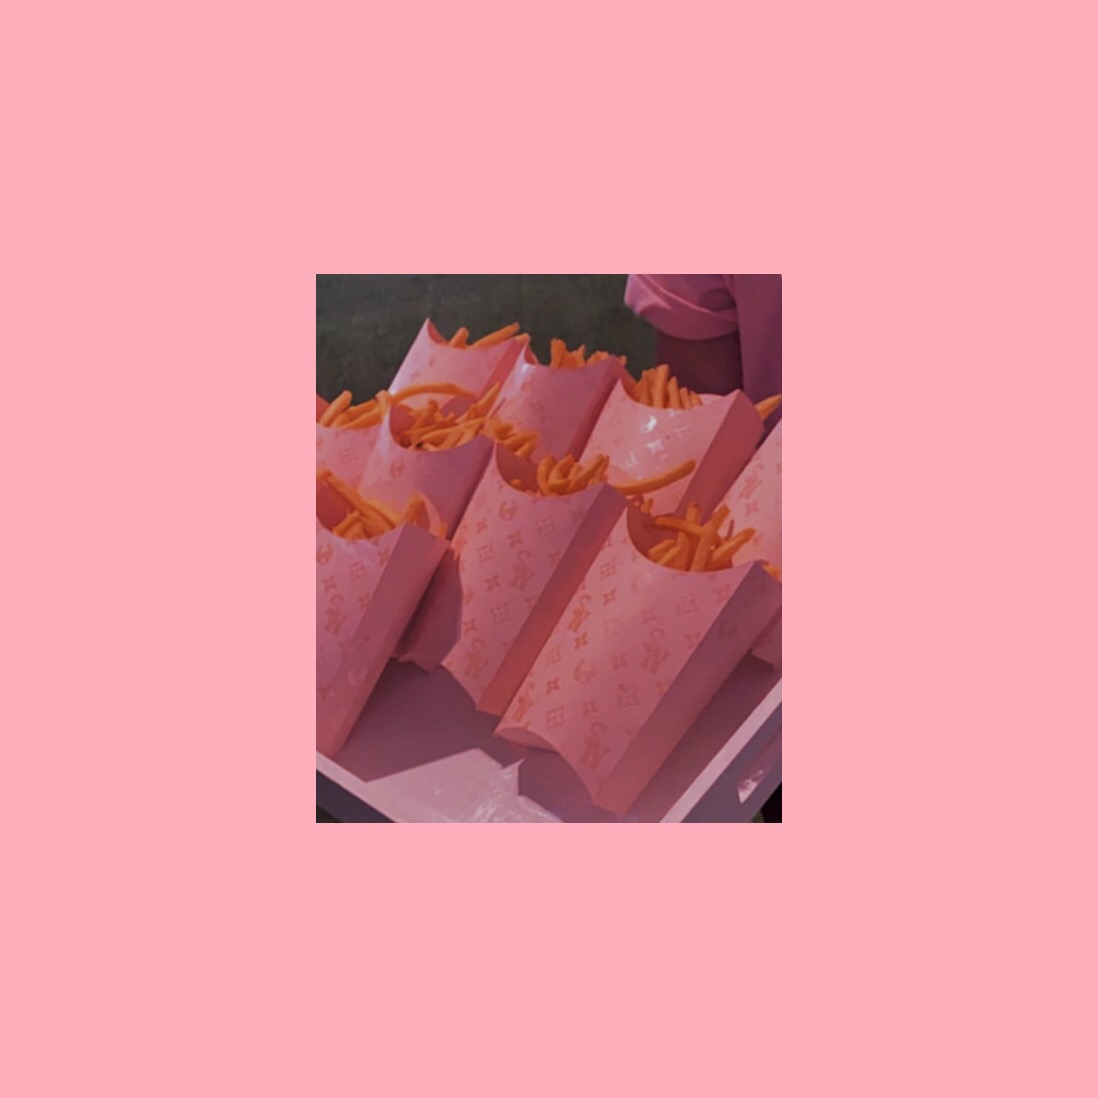 Pink Rosa Fastfood Kyliejenner Fries Vscox Spectrum Food